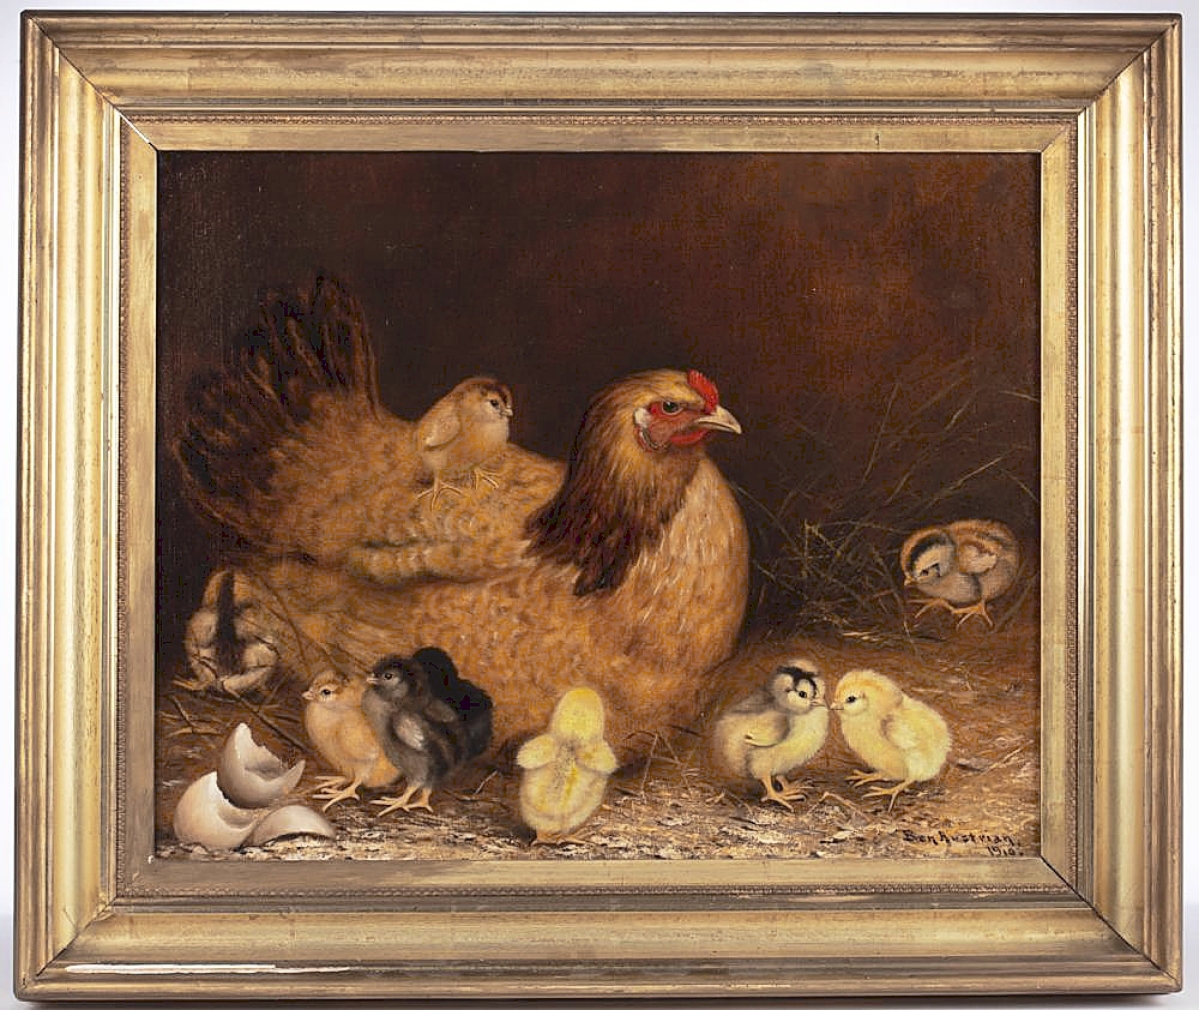 The Breckels collected works made in Berks Co.; this painting of a hen with chicks by Ben Austrian (Berks Co., 1870-1921) charmed bidders; an online bidder snapped it up for $28,680 ($6/9,000).